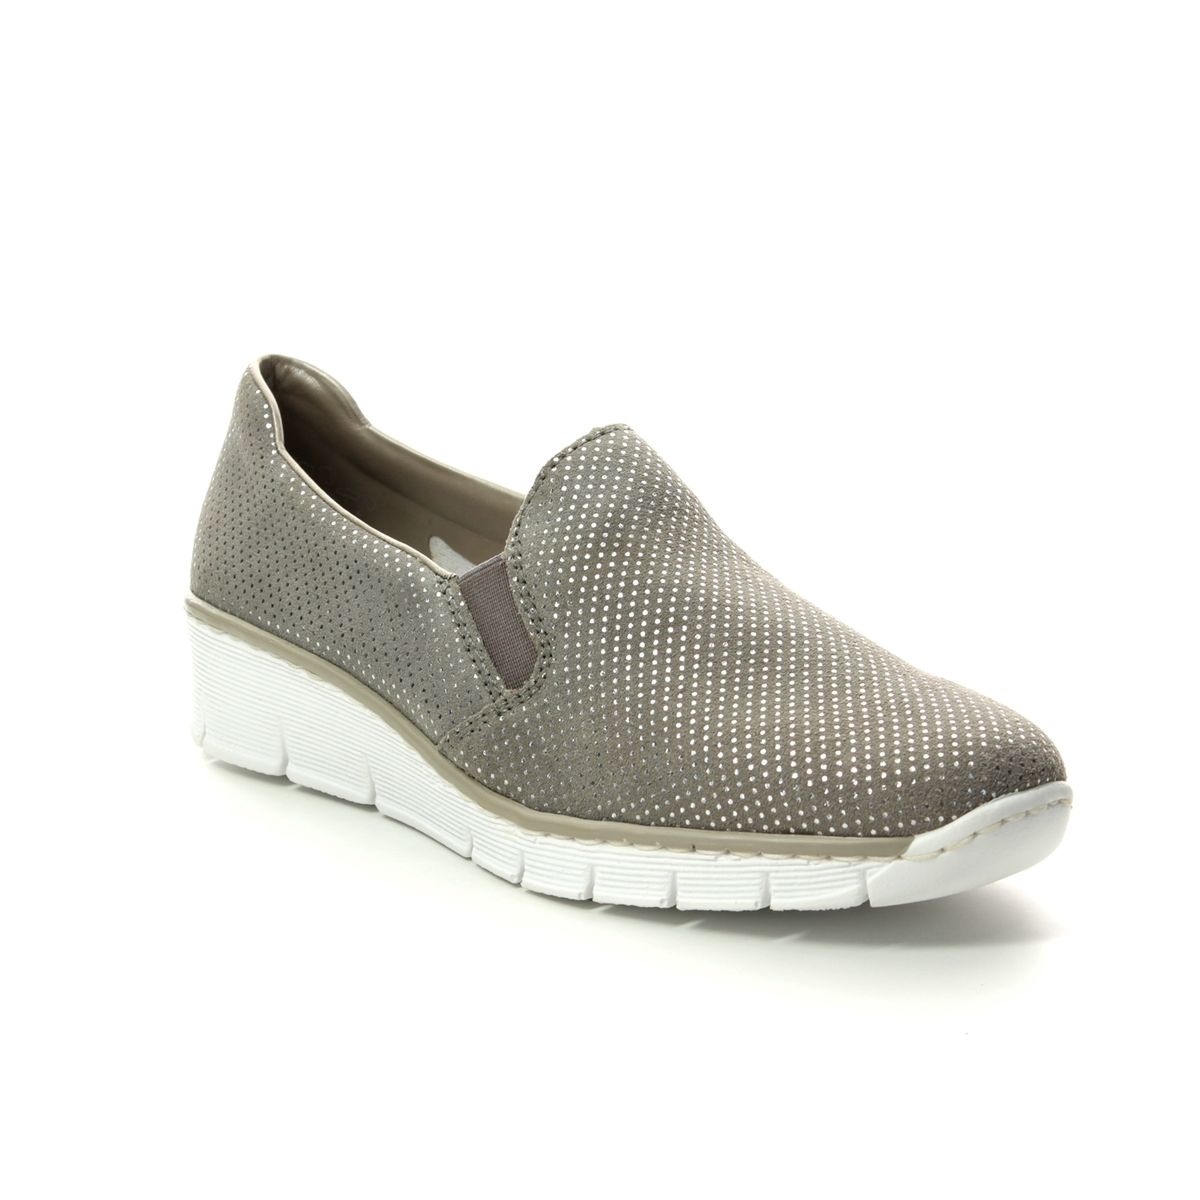 Rieker Bocciago Light Taupe Womens Comfort Slip On Shoes 53766-41 In Size 41 In Plain Light Taupe